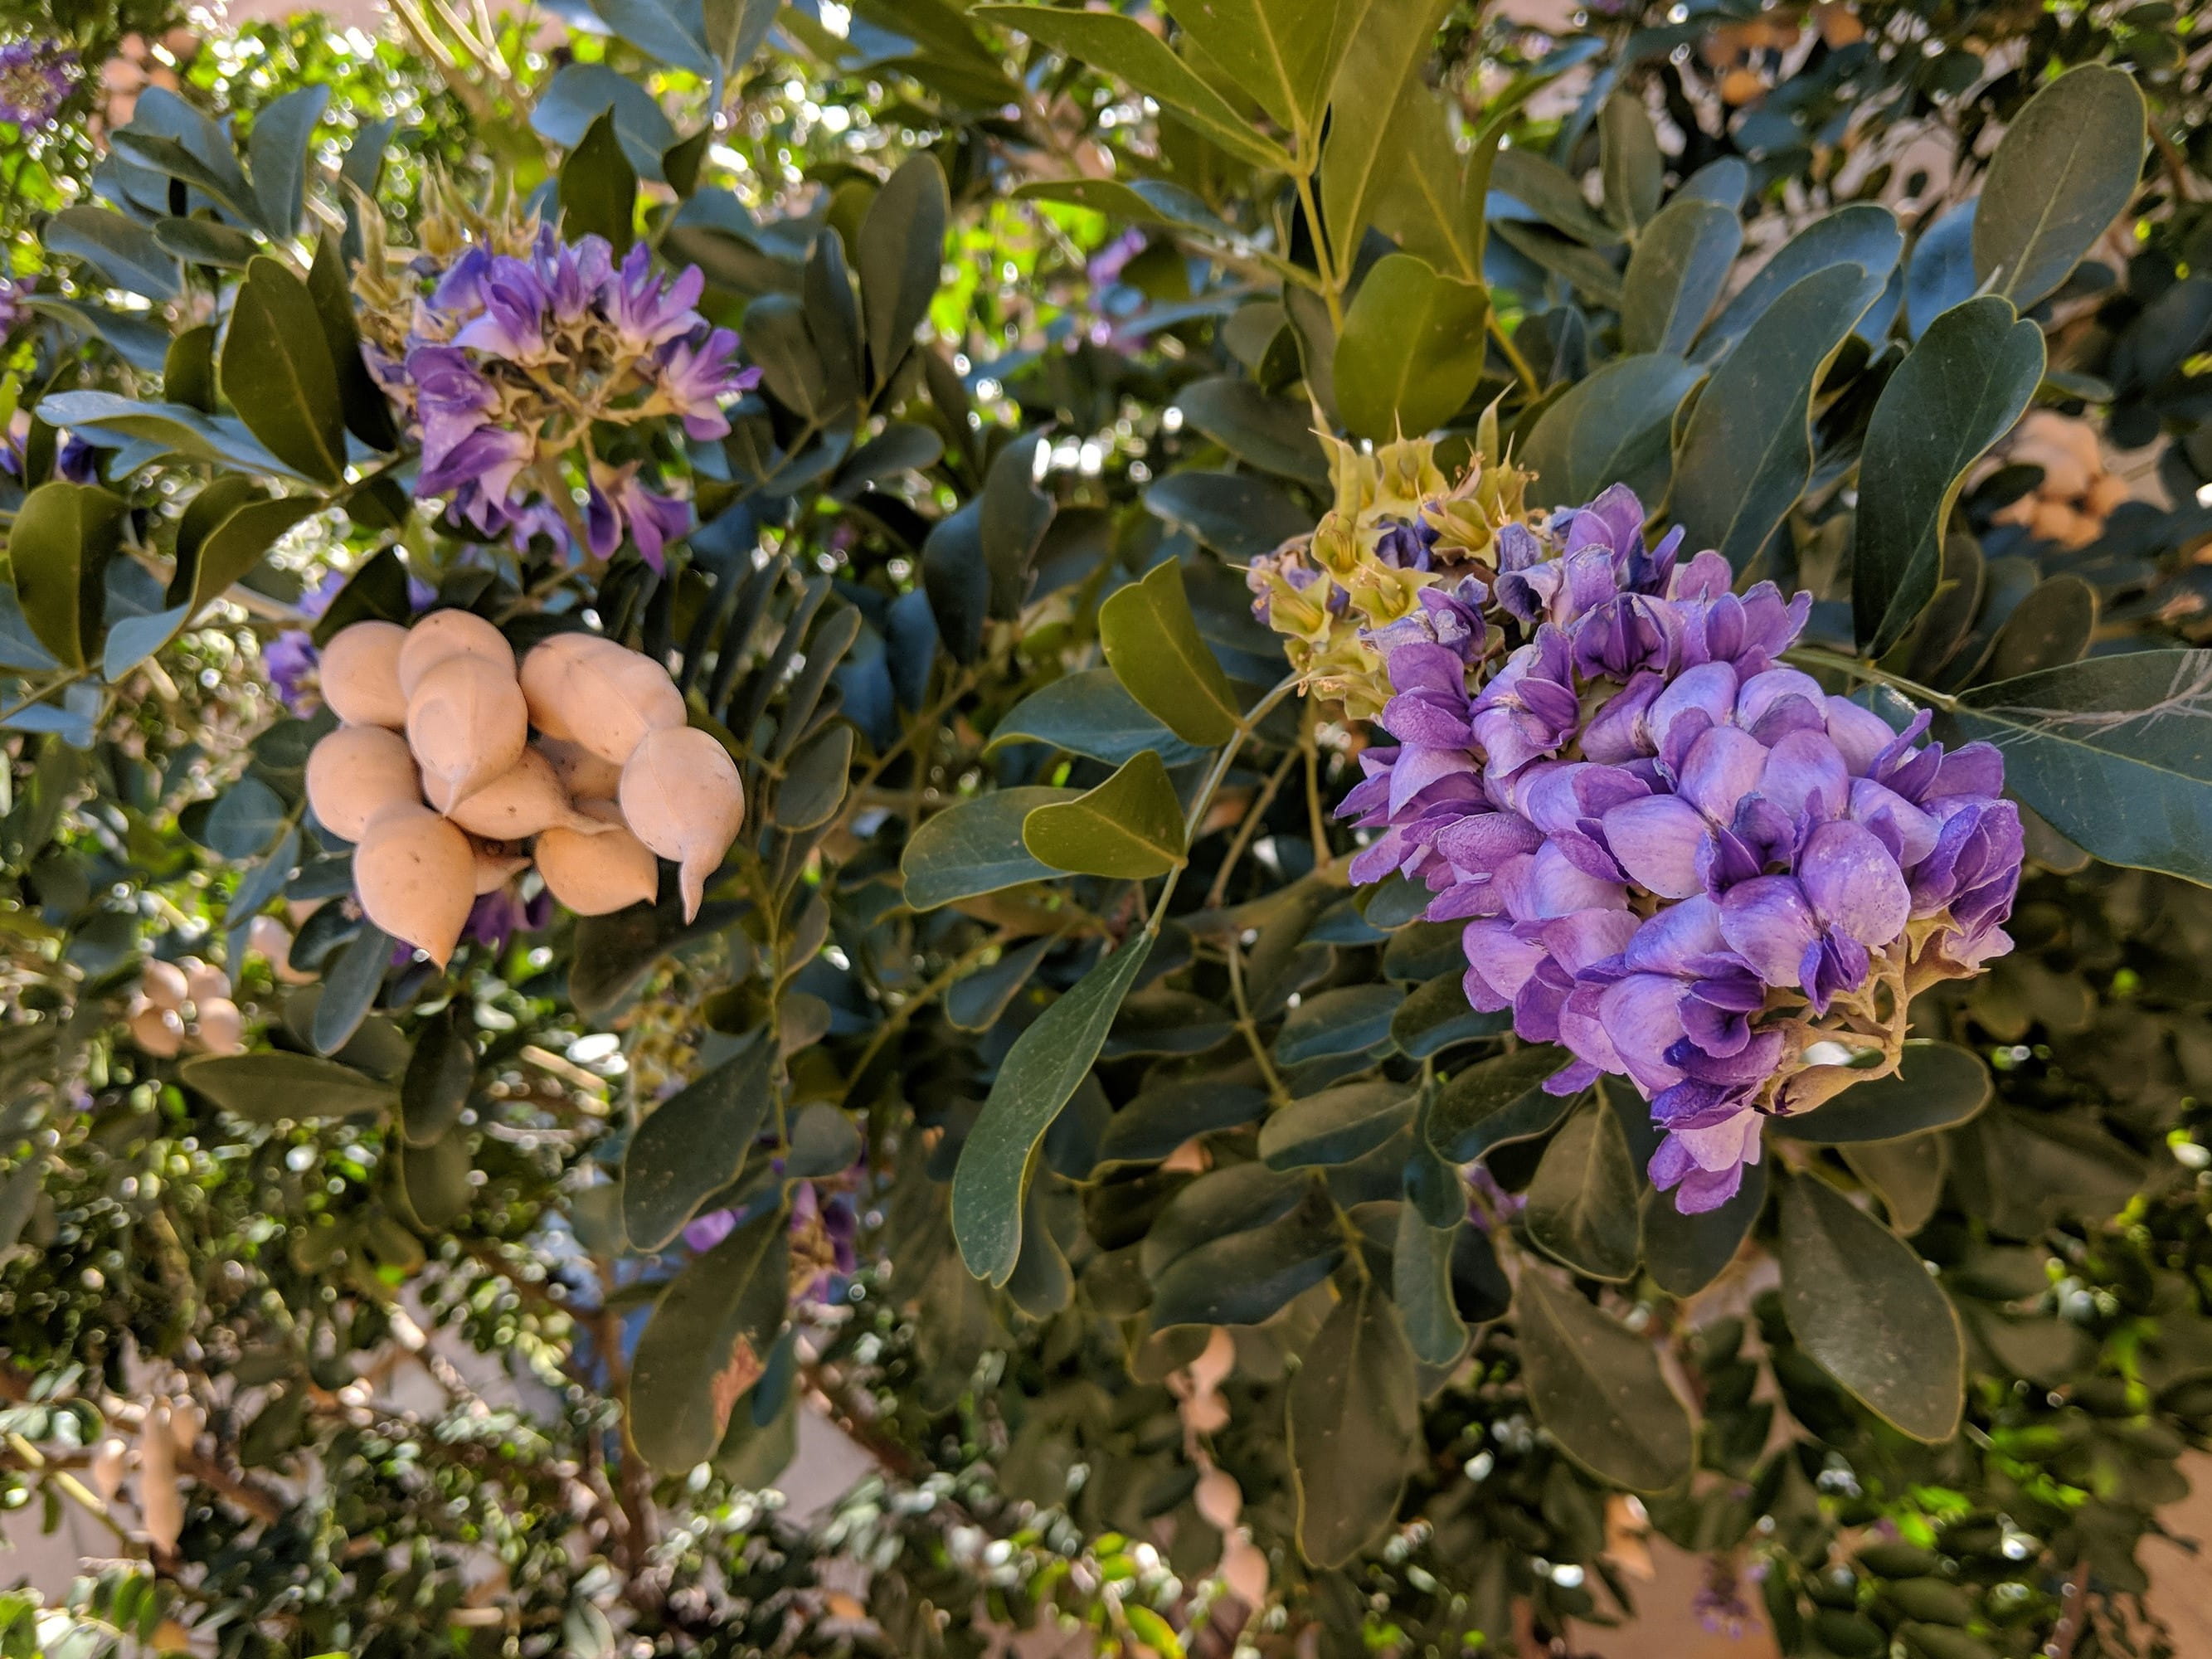 mescal bean pods with flowers